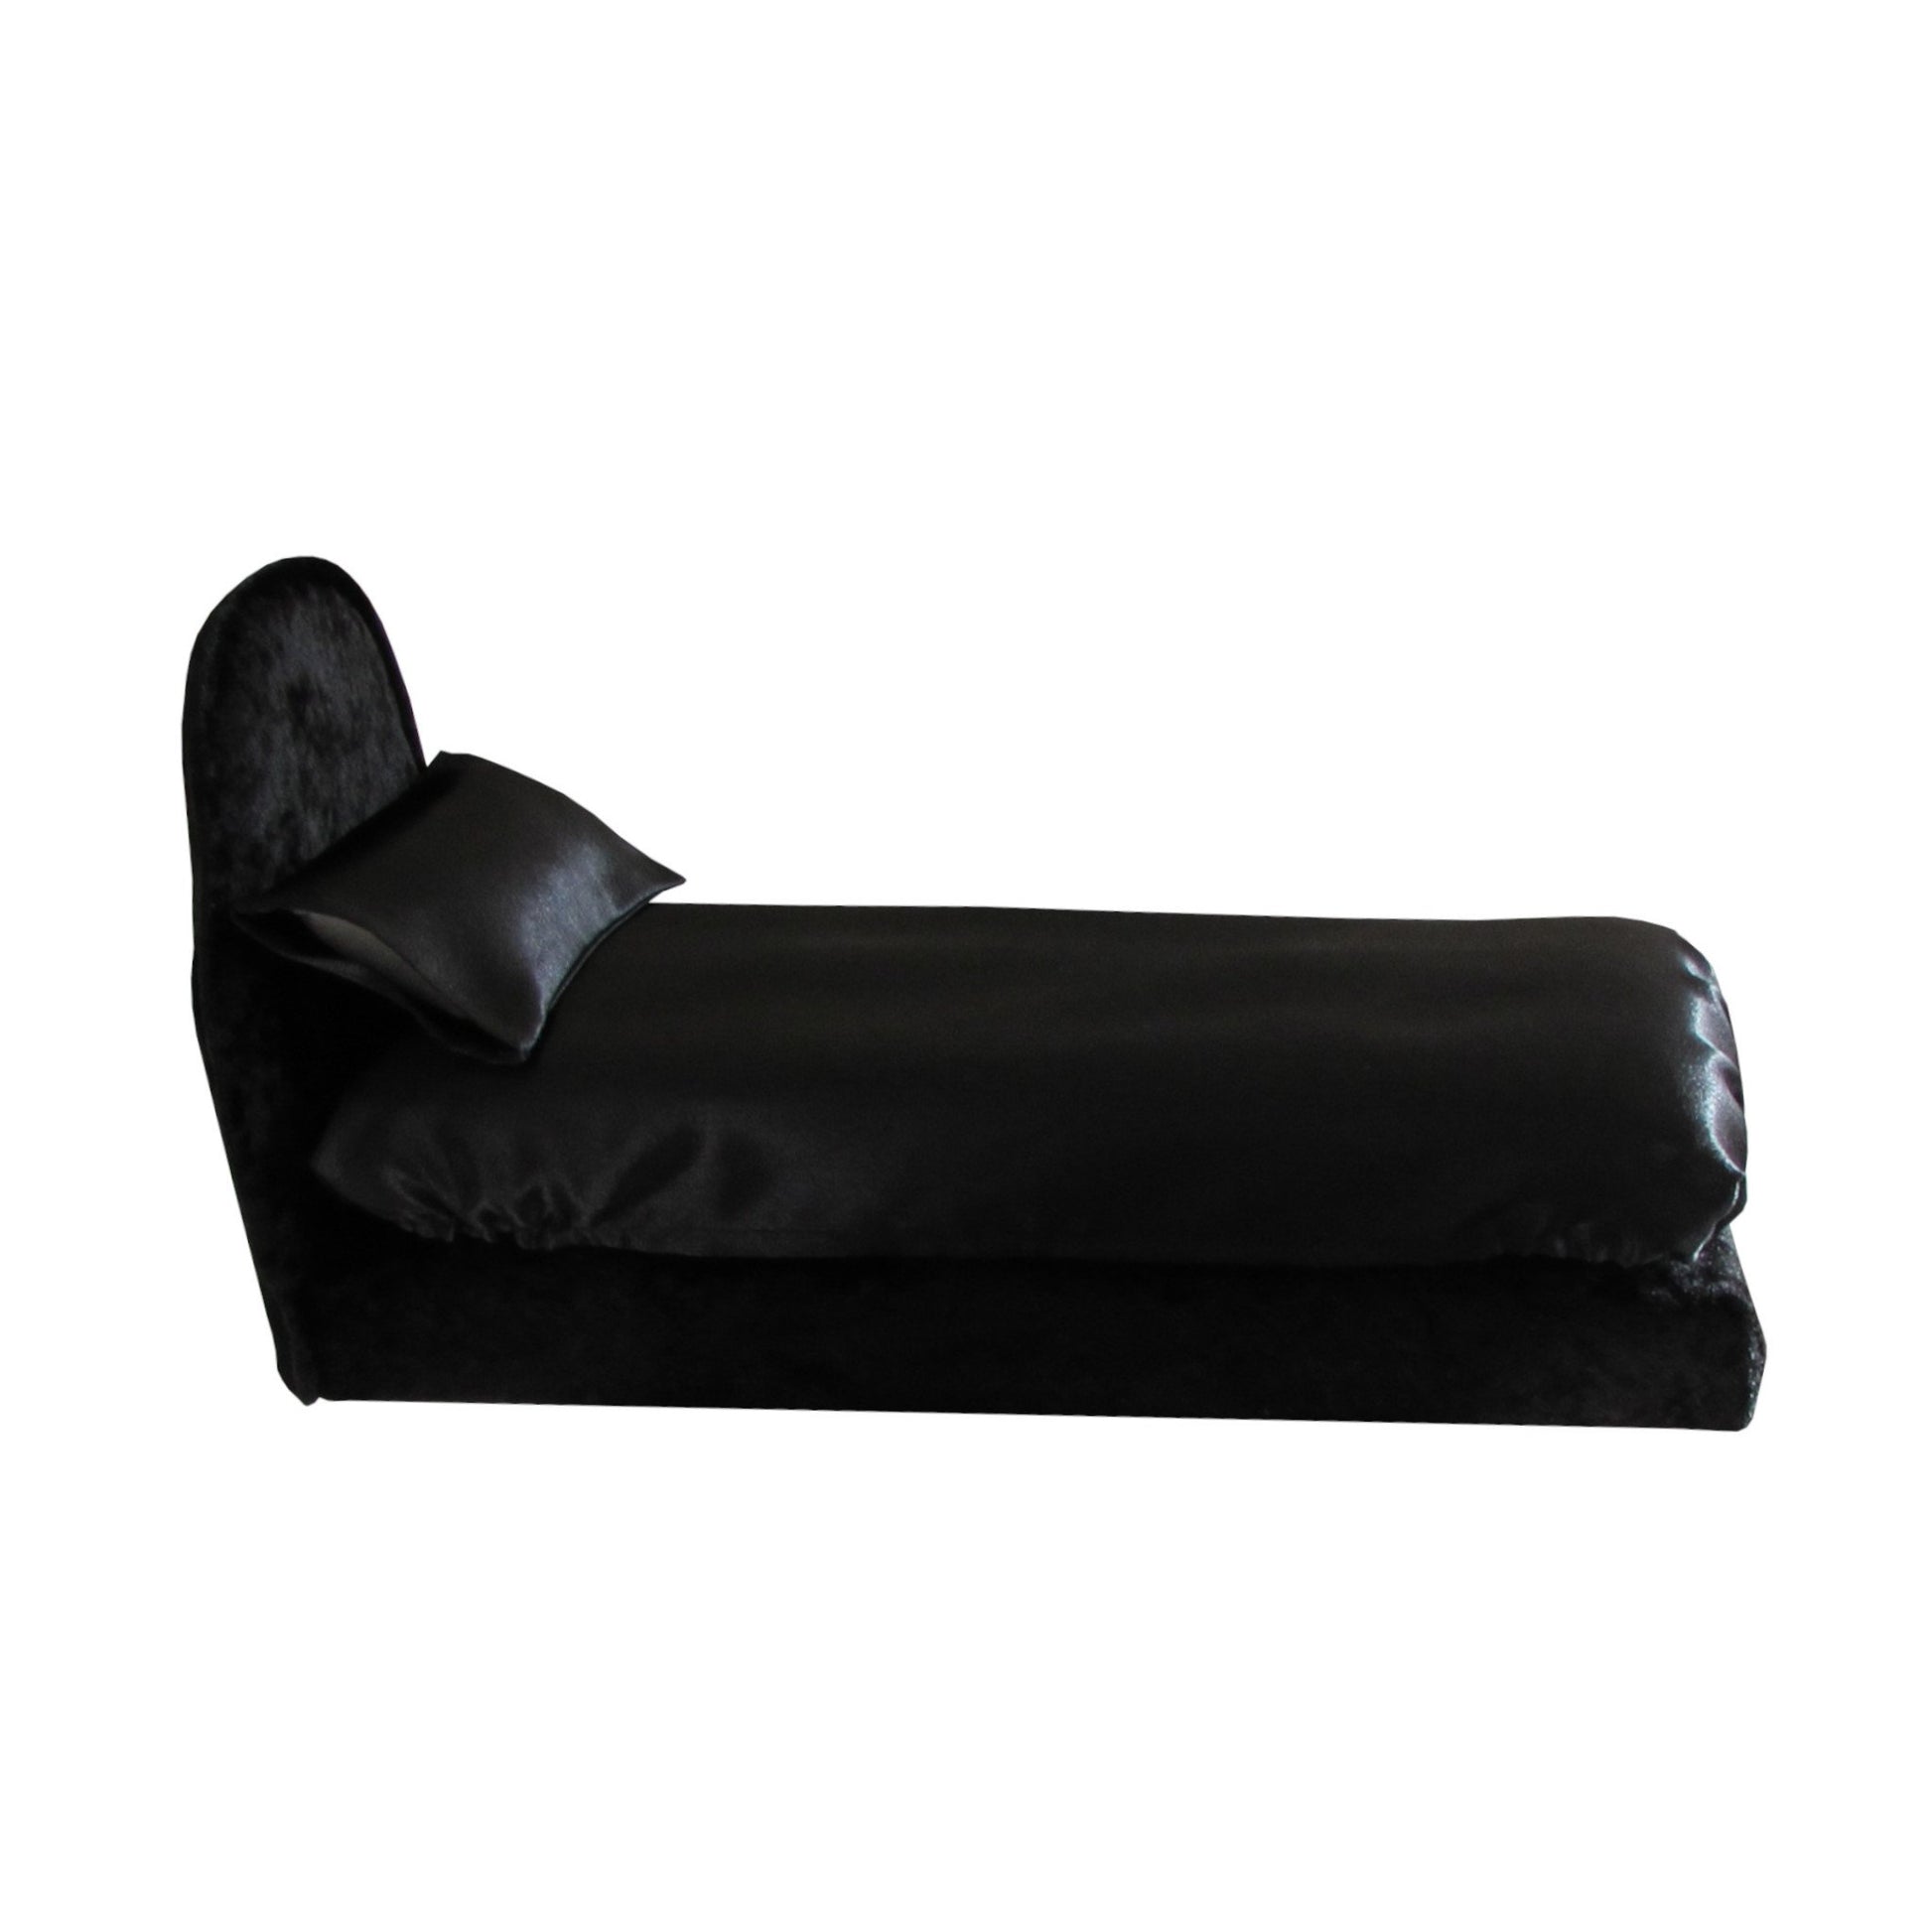 Black Satin Doll Fitted Sheet, Pillow, and Black Crushed Velvet Doll Bed for 11.5-inch and 12-inch dolls